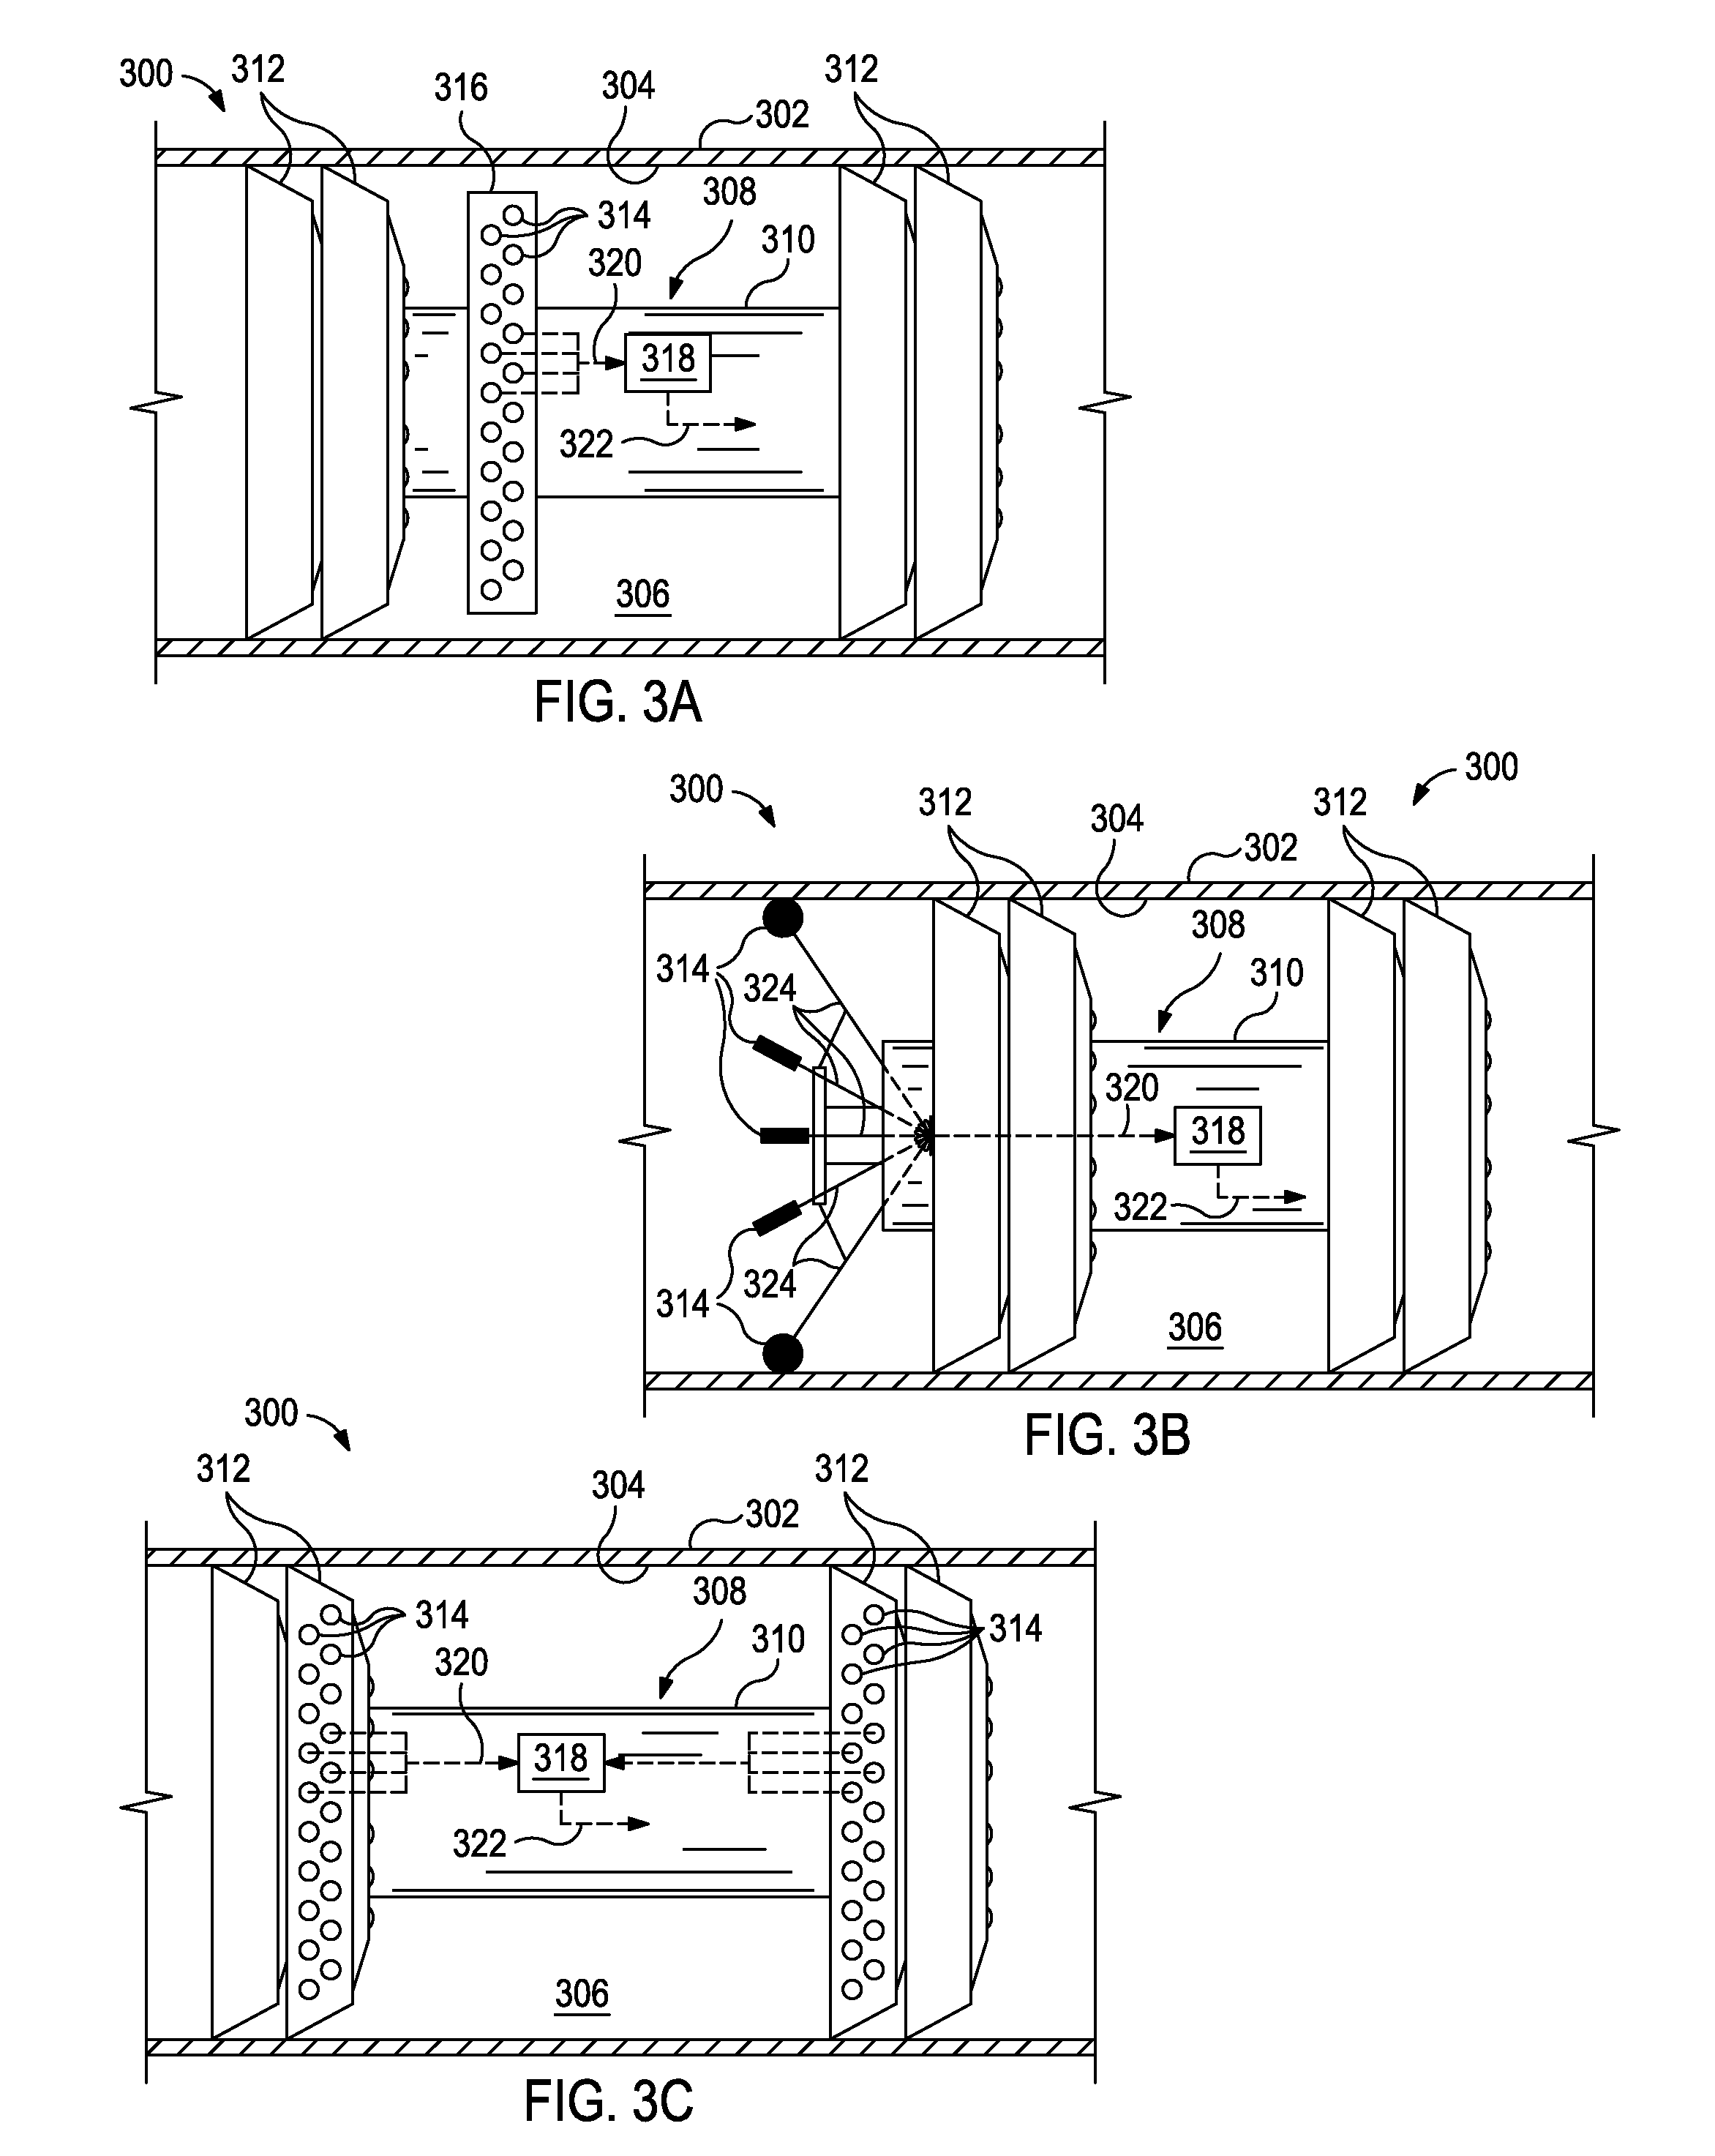 Systems and methods for inspecting and monitoring a pipeline